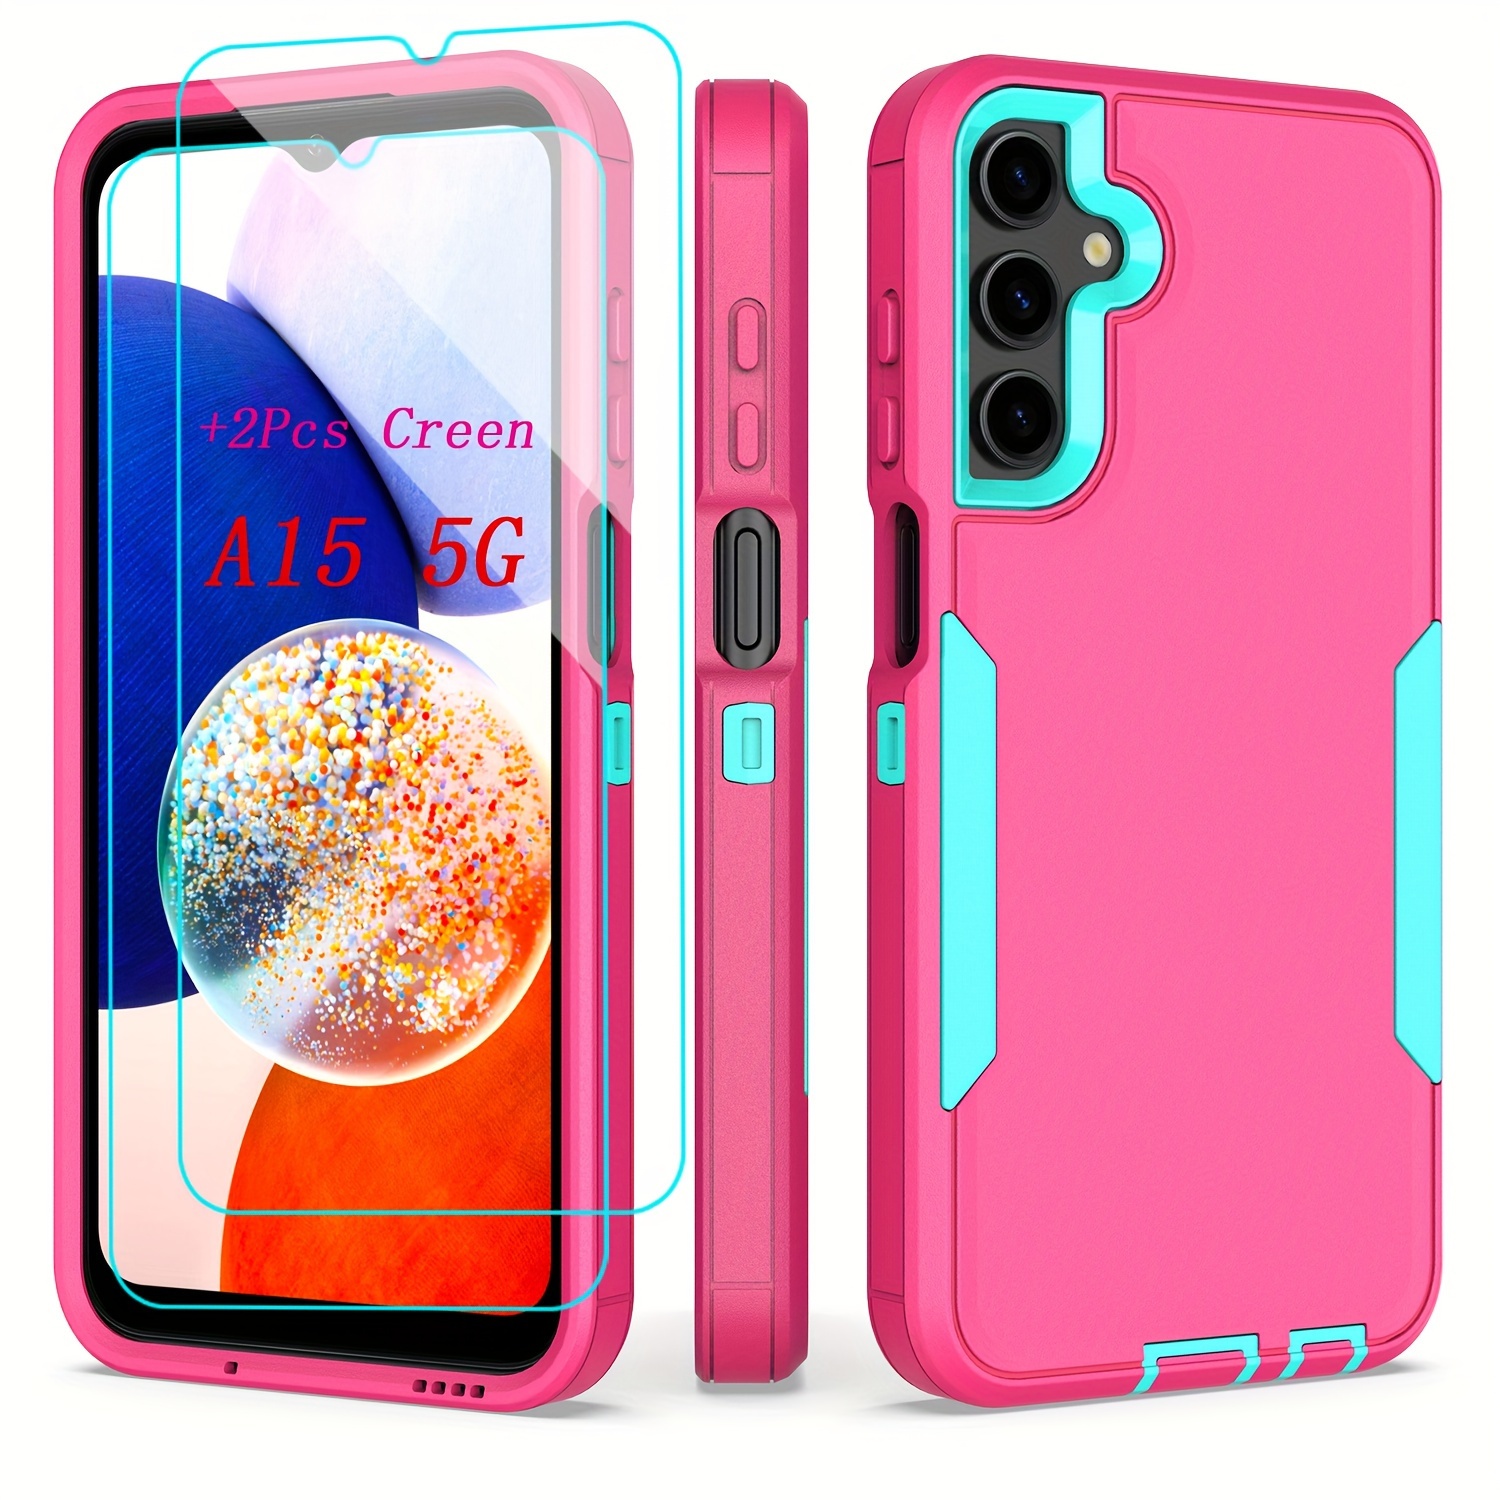 

For Samsung Galaxy A15 5g Case With 2 Tempered Glass Screen Protector, Full Body Hybrid Hard Pc Soft Tpu Military Grade Shockproof Case For Galaxy A15 5g